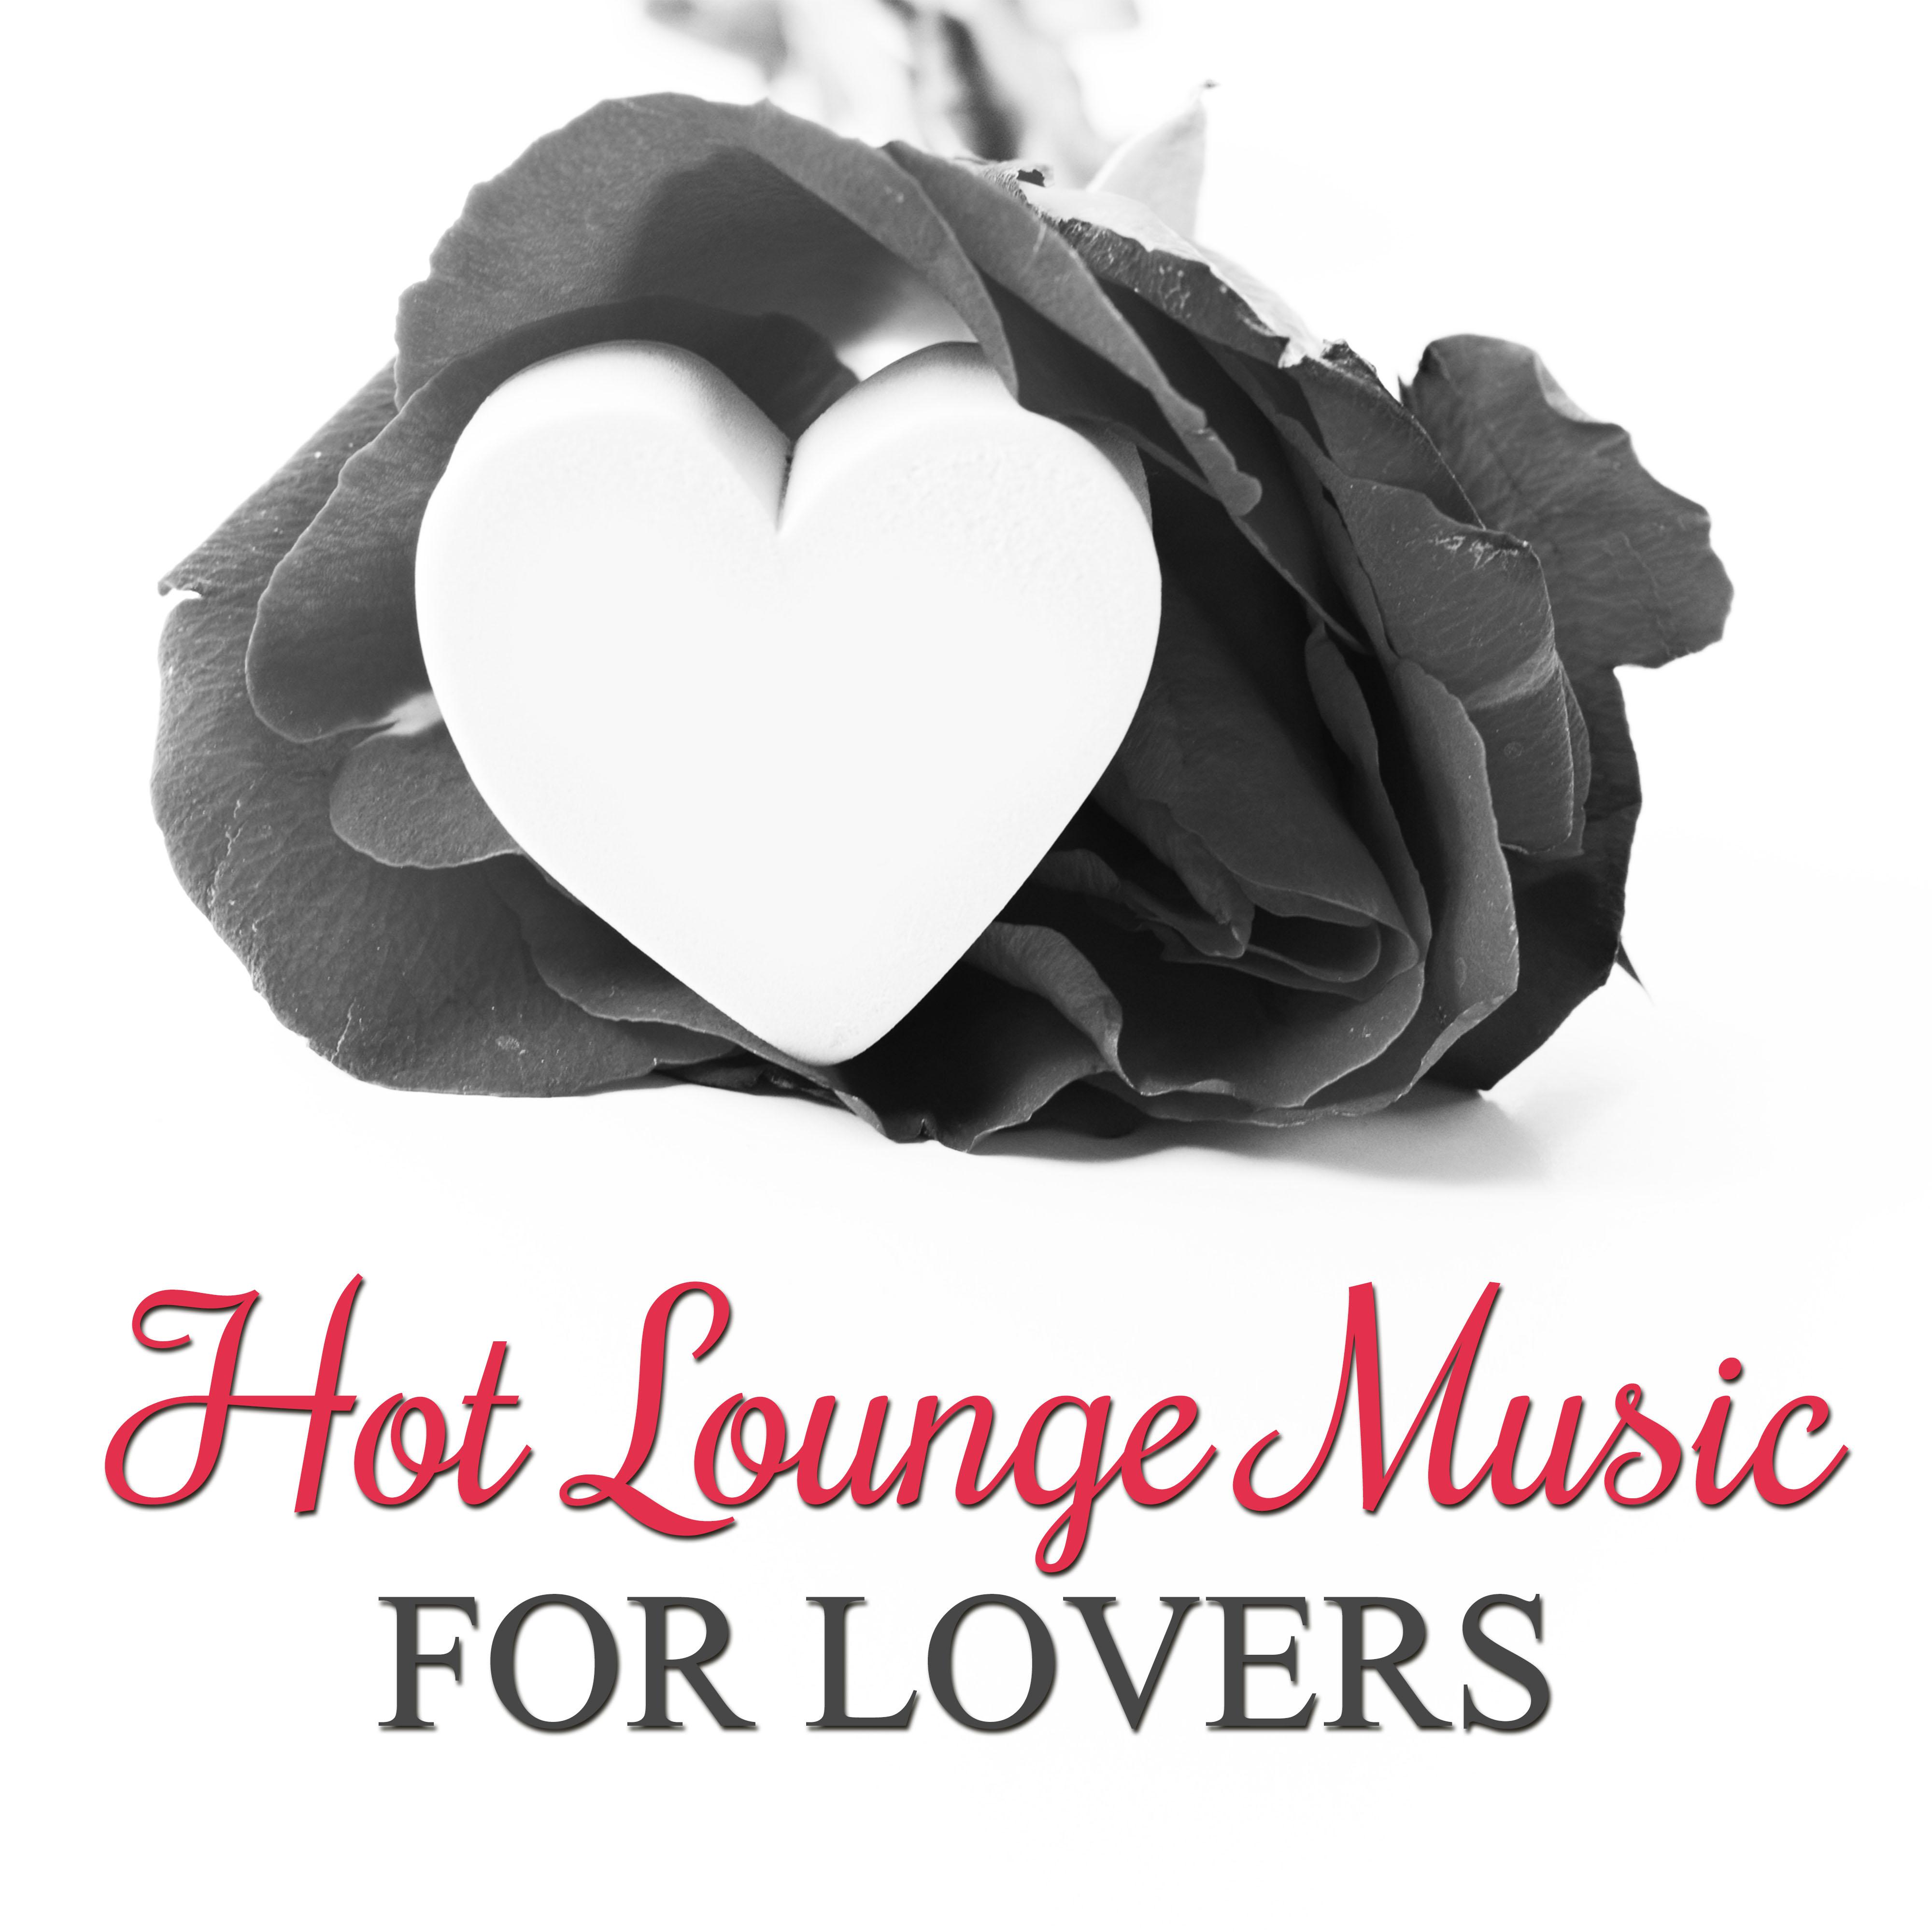 Hot Lounge Music for Lovers – Soft and Mellow Jazz, Love Music, Background Music for Lovers, Erotic Jazz, Dinner for Two, Romantic Jazz